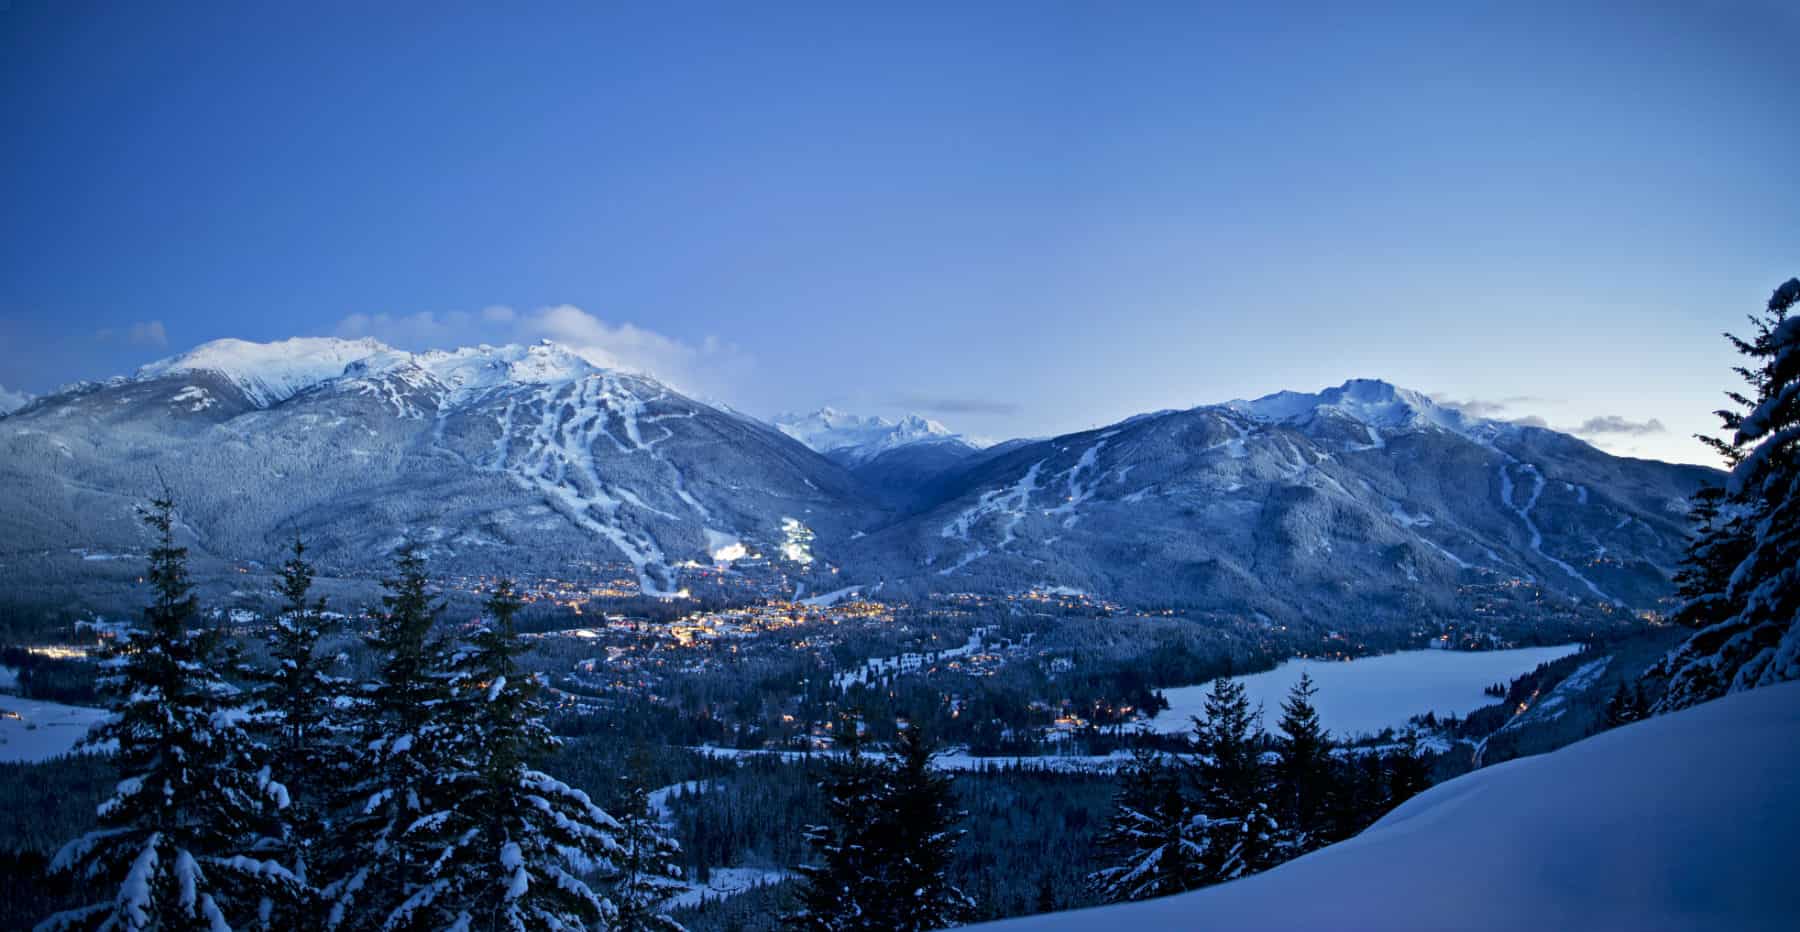 Panoramic-photo-of-Whistler-Blackcomb-ski-slops-from-a-distance